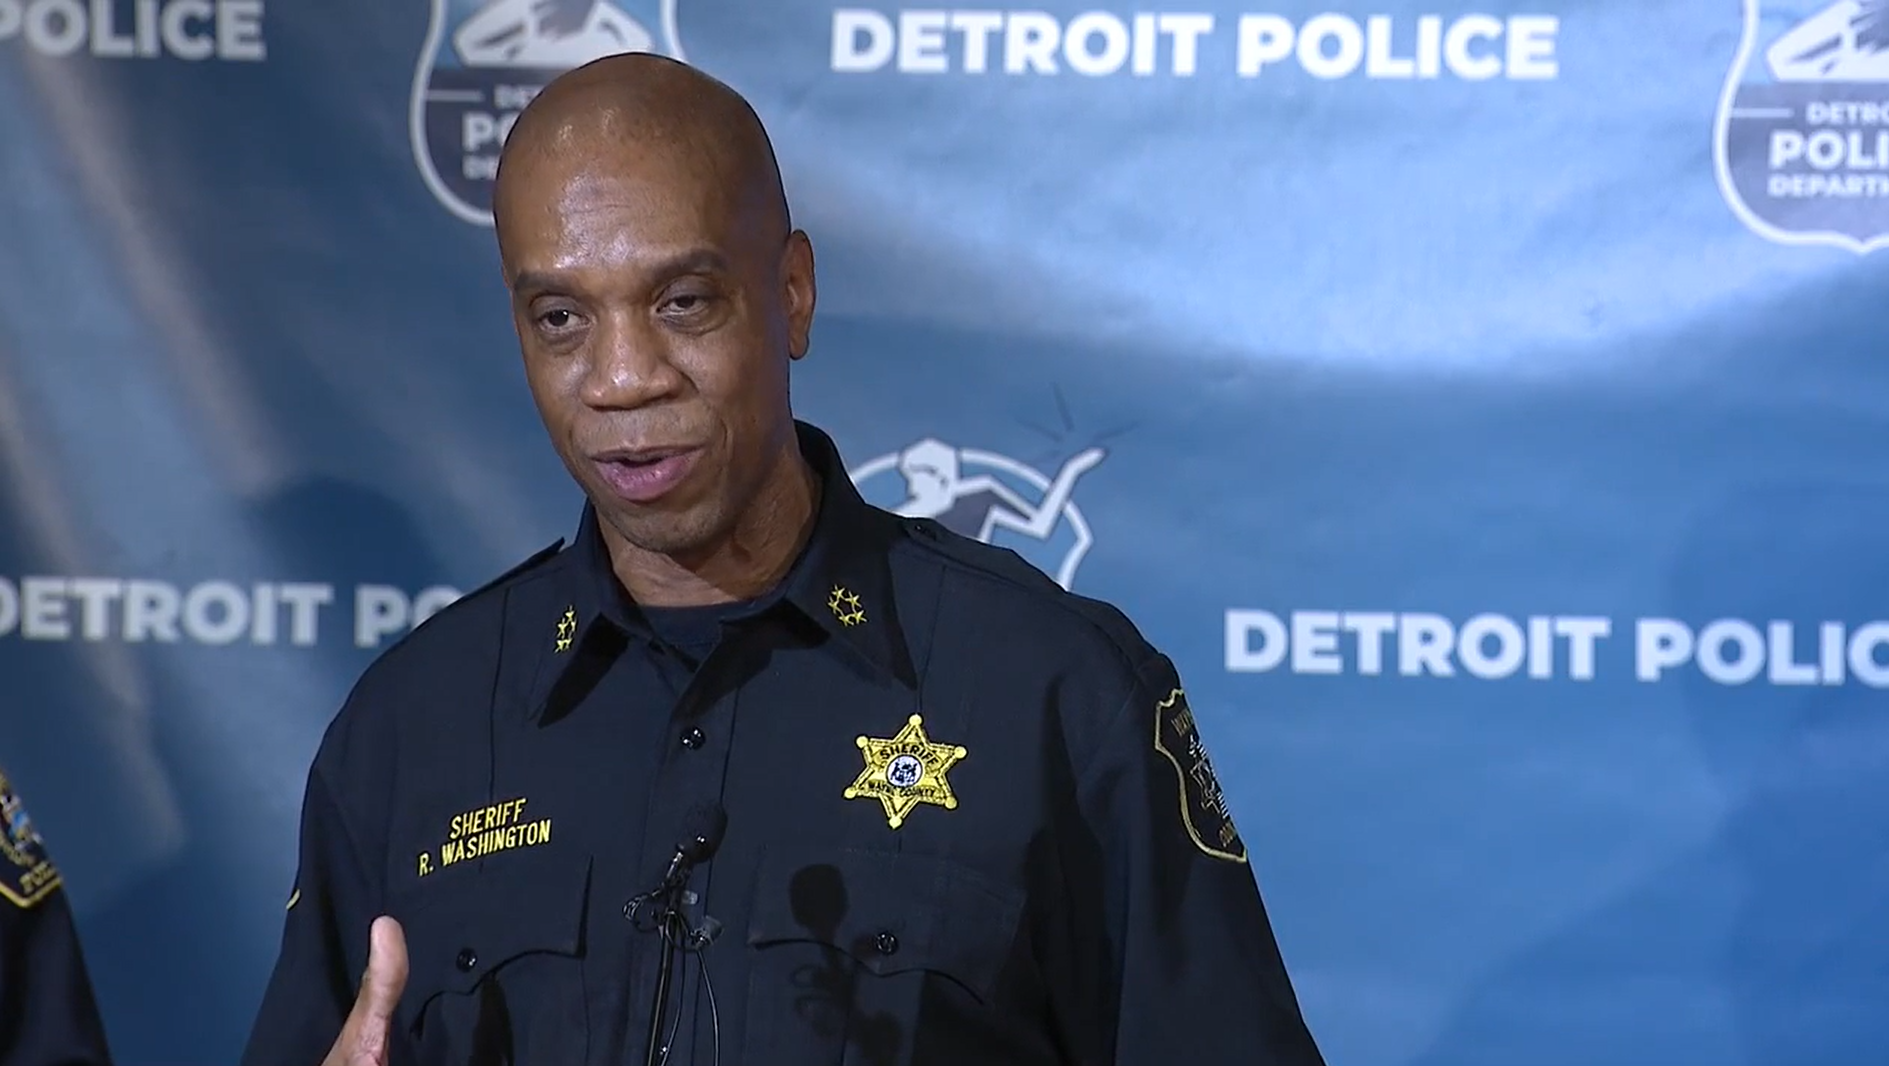 Wayne Co. leaders, Detroit Police urge gun owners to store firearms safely